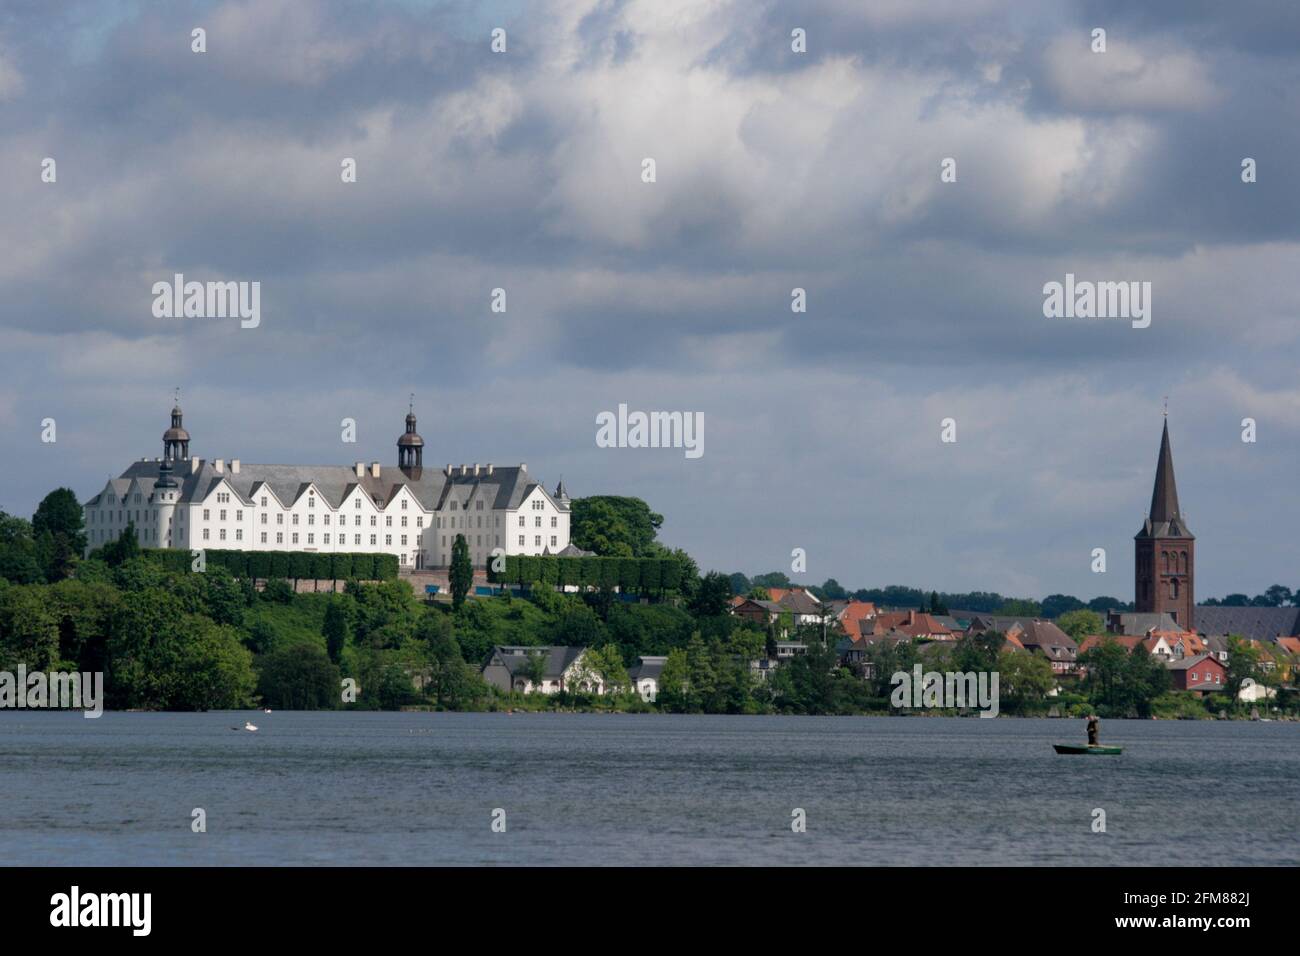 Lakeside view of the beautiful castle and church of Plön, Germany with cloudy sky in the background and sun shining on the landmark Stock Photo